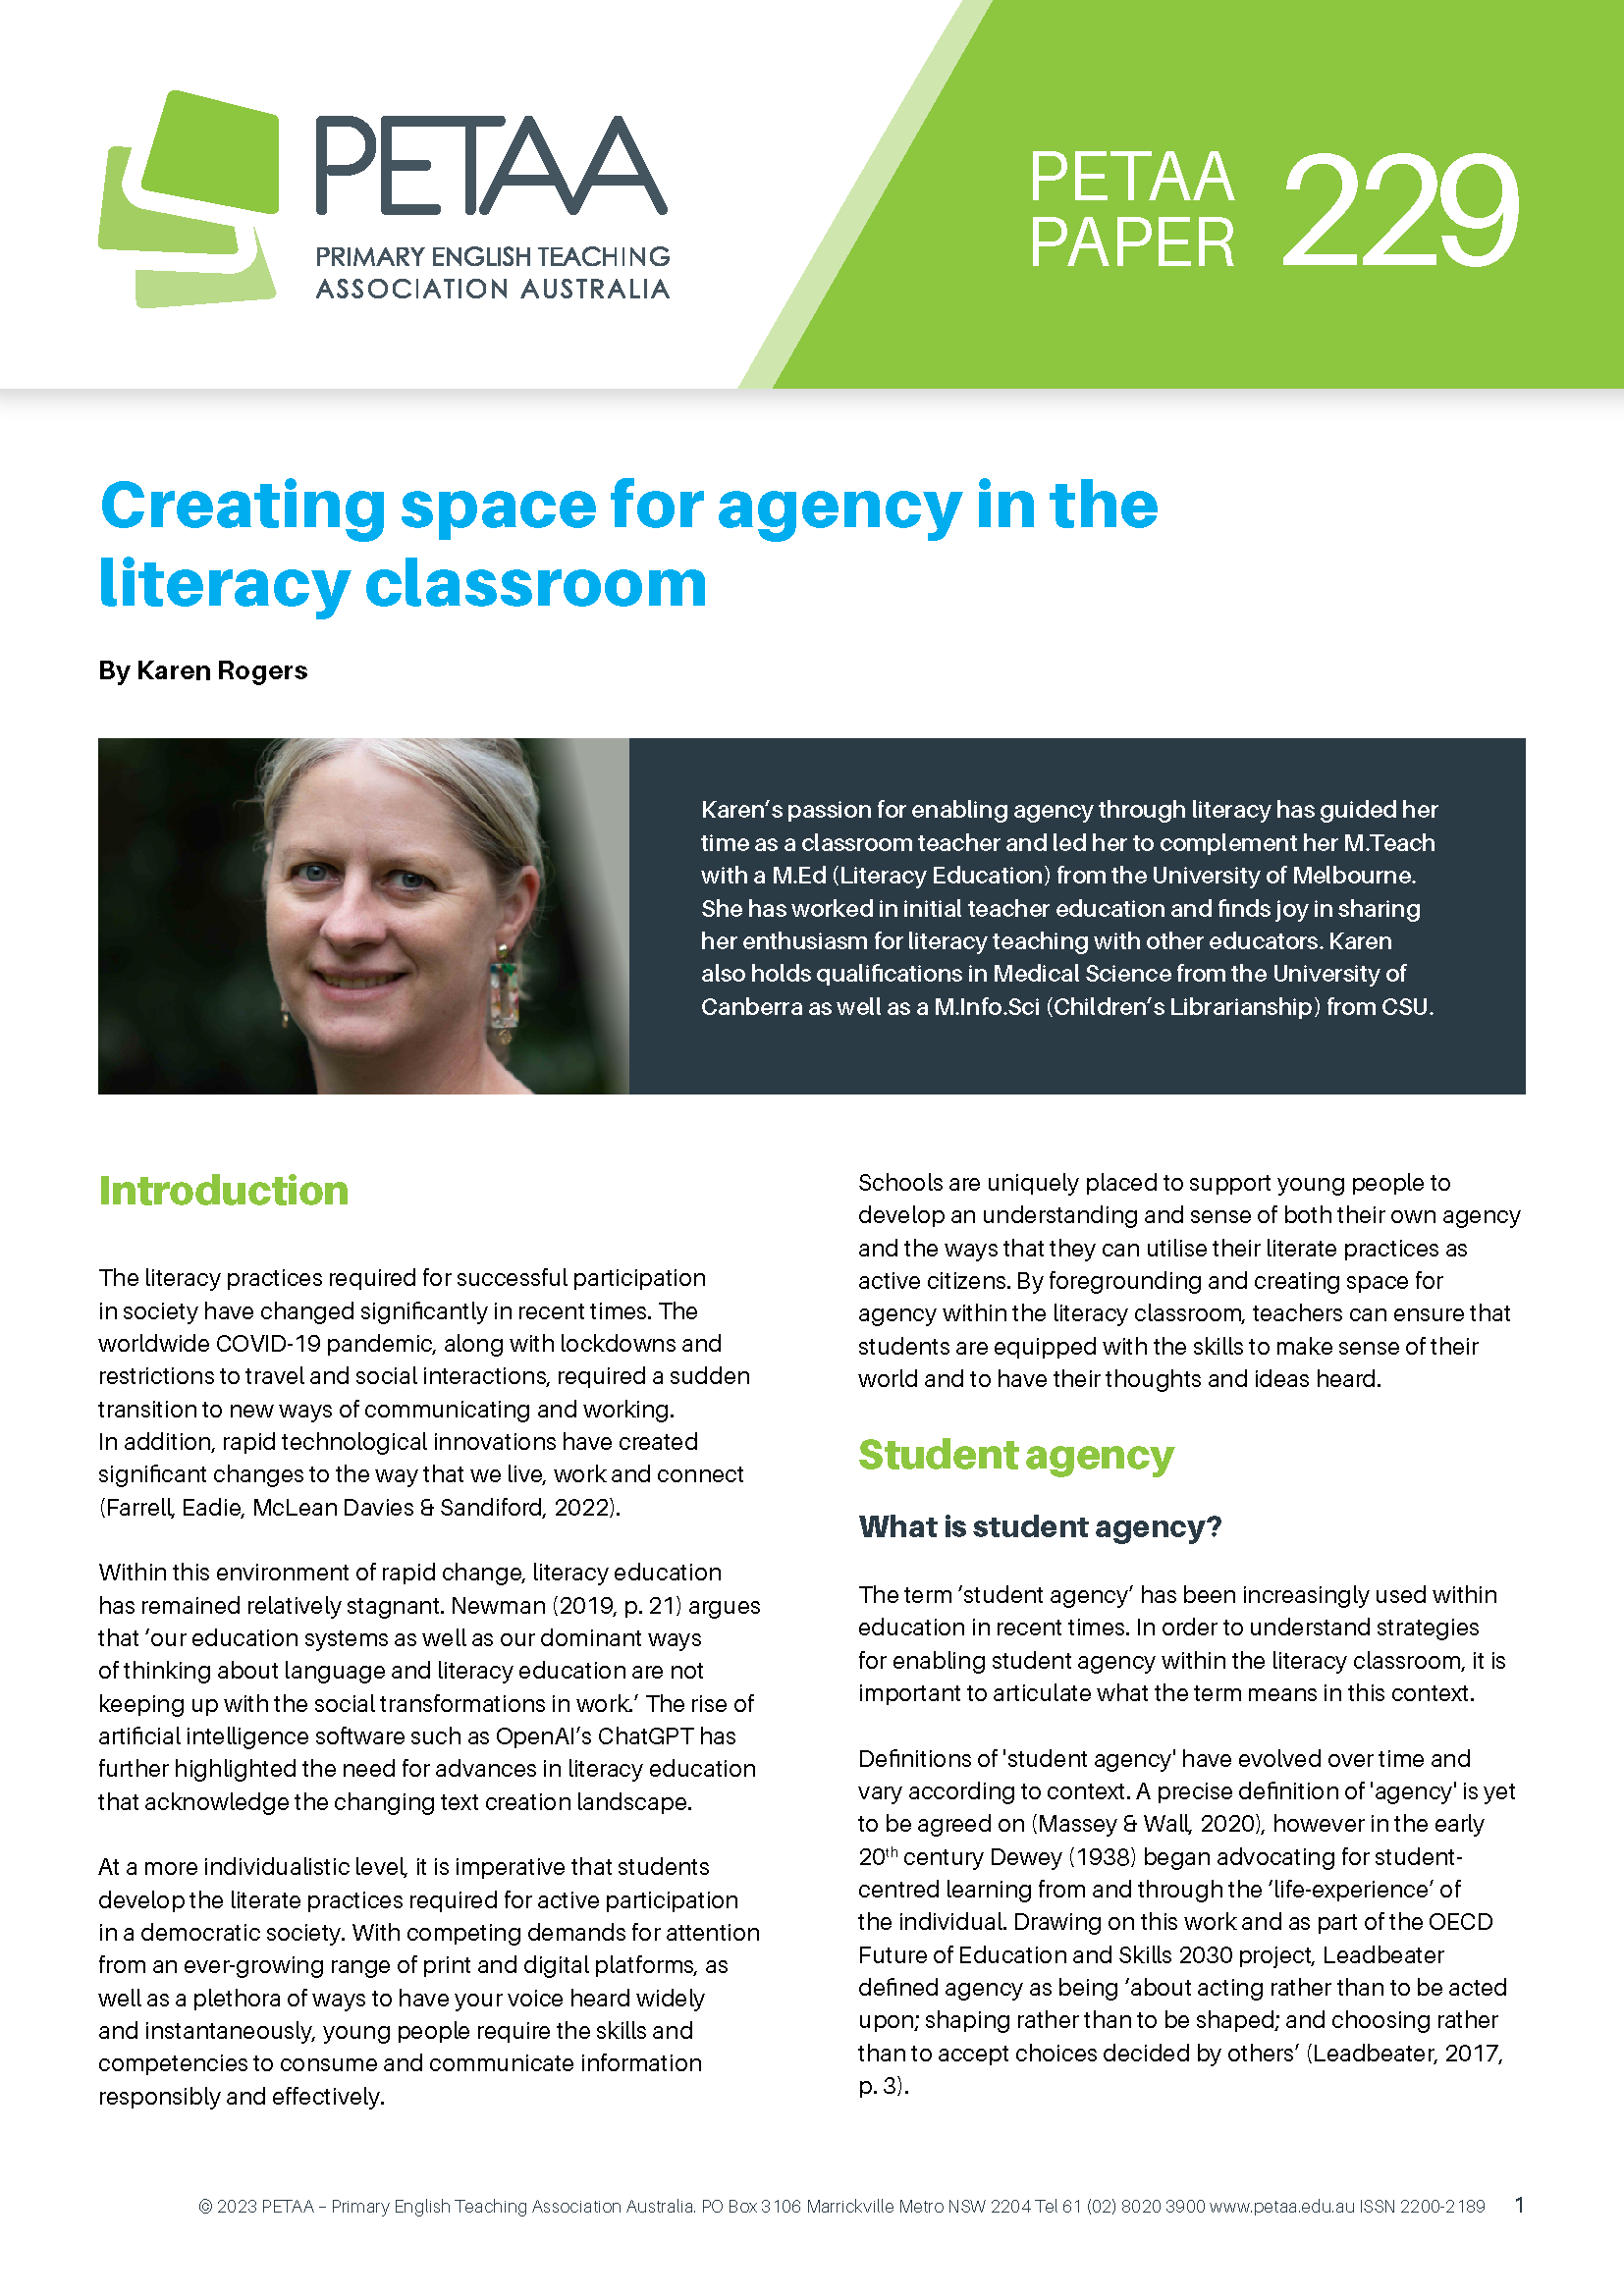 PP229: Creating space for agency in the literacy classroom